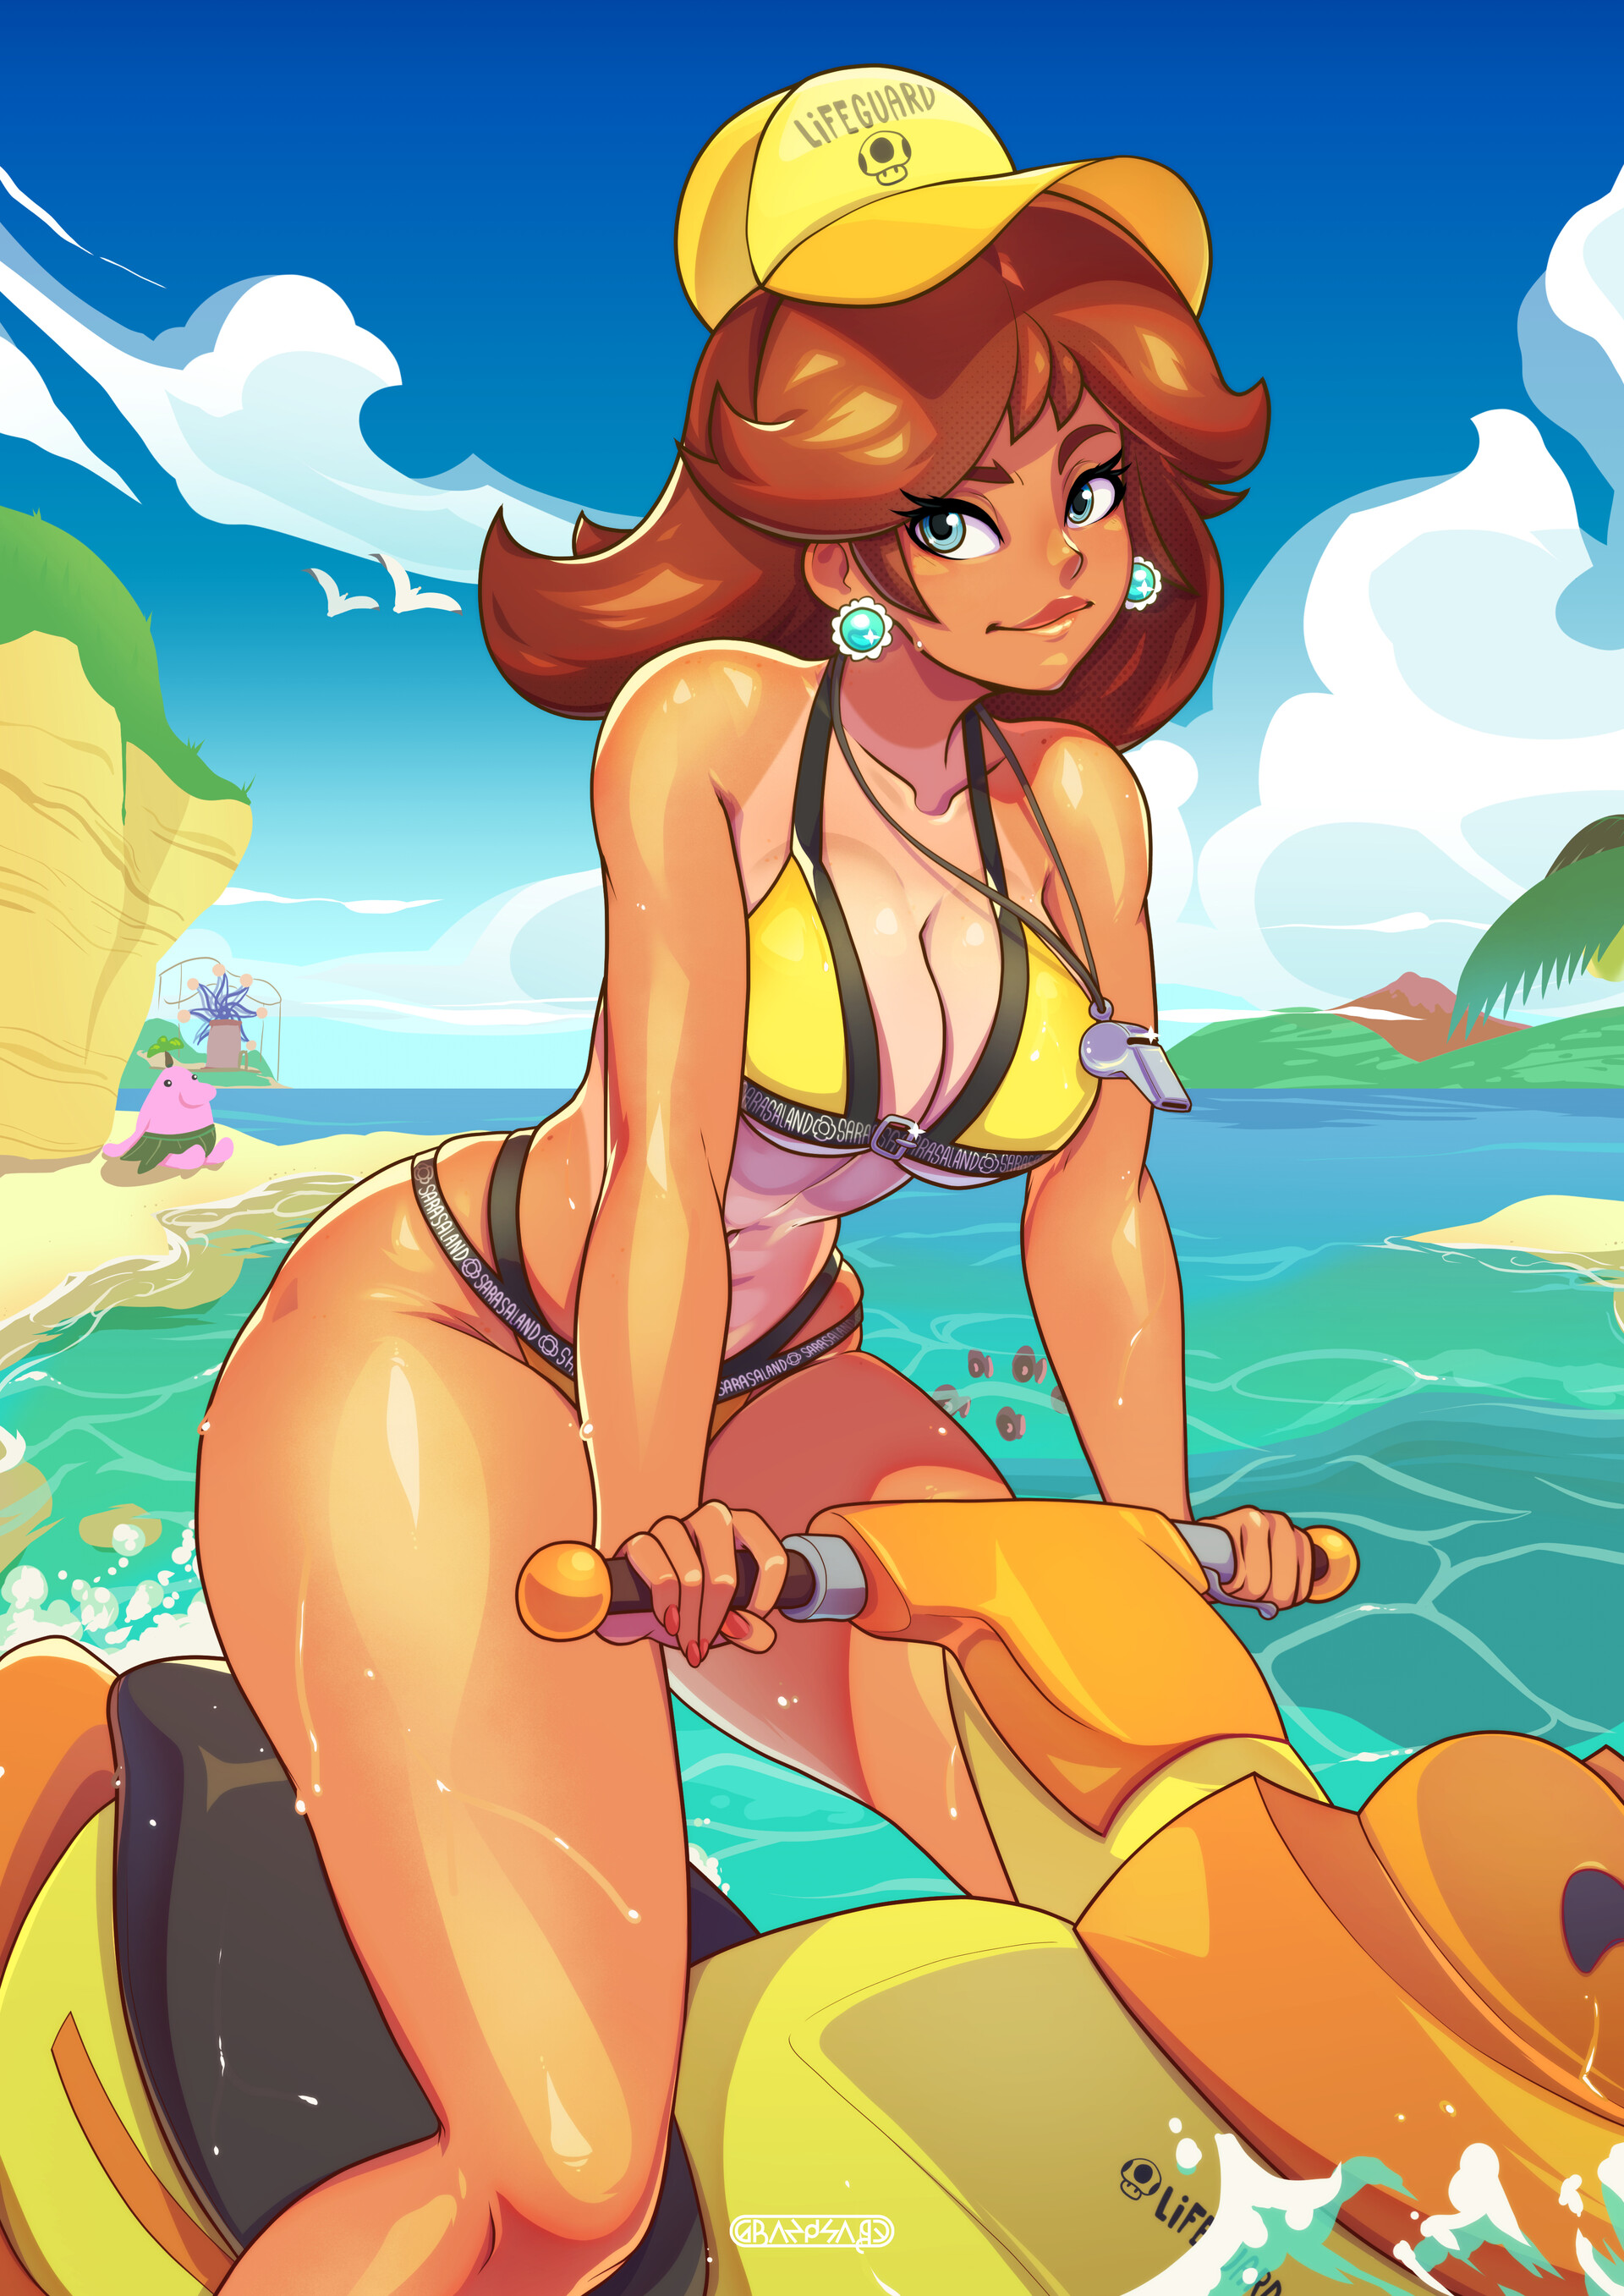 Lifeguard Daisy (From Sketch to Finish), Matthieu Contrant.